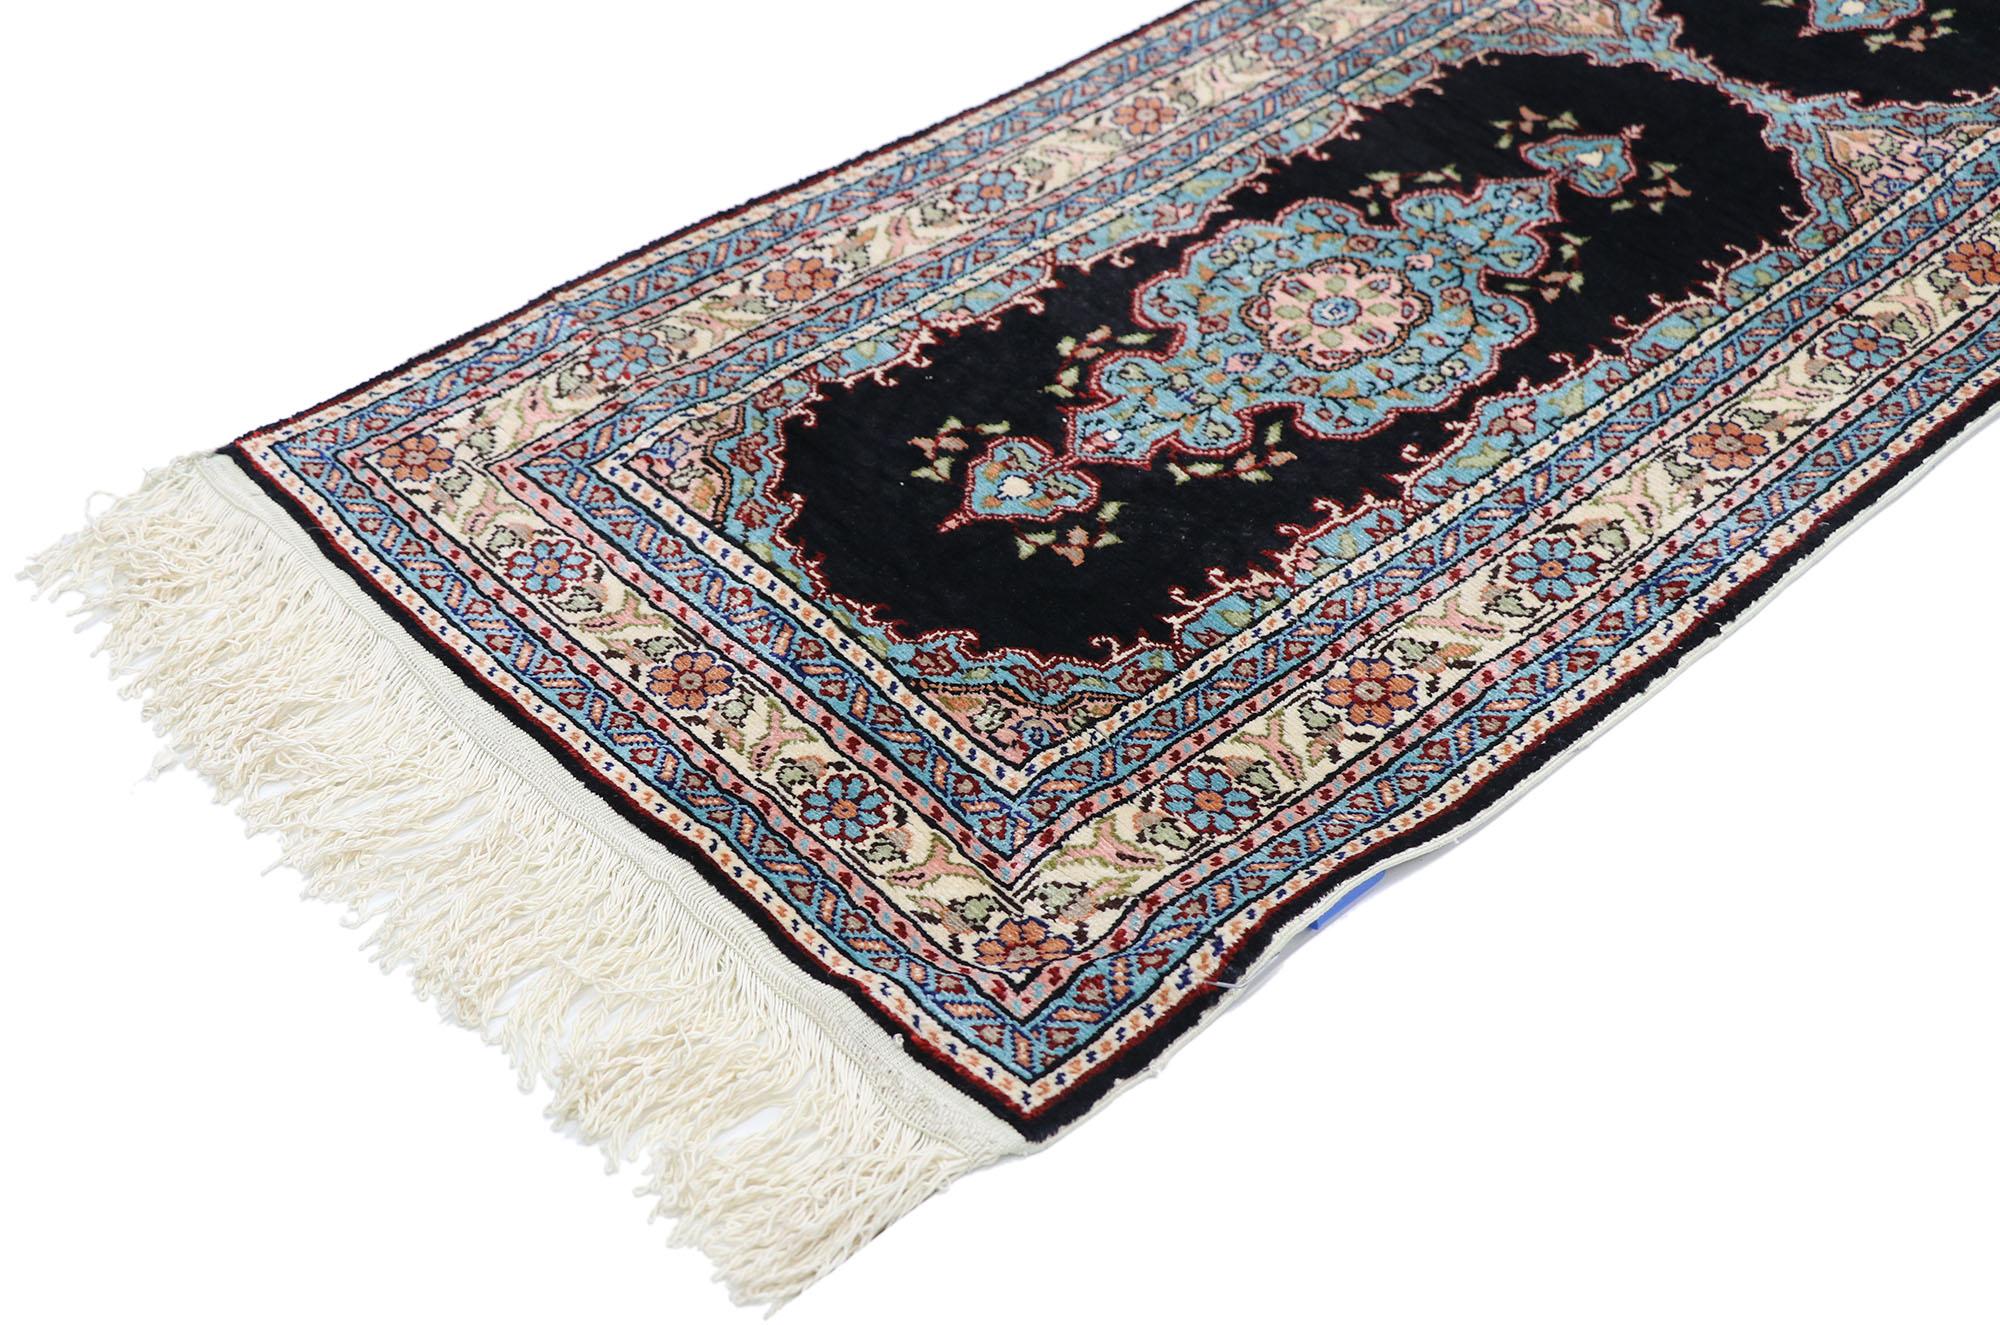 77797 vintage Turkish Silk Hereke rug with neoclassical Victorian style 01'04 x 04'01. With ornate details and well-balanced symmetry combined with a regal color palette, this hand-knotted vintage Turkish Silk Hereke rug beautifully embodies